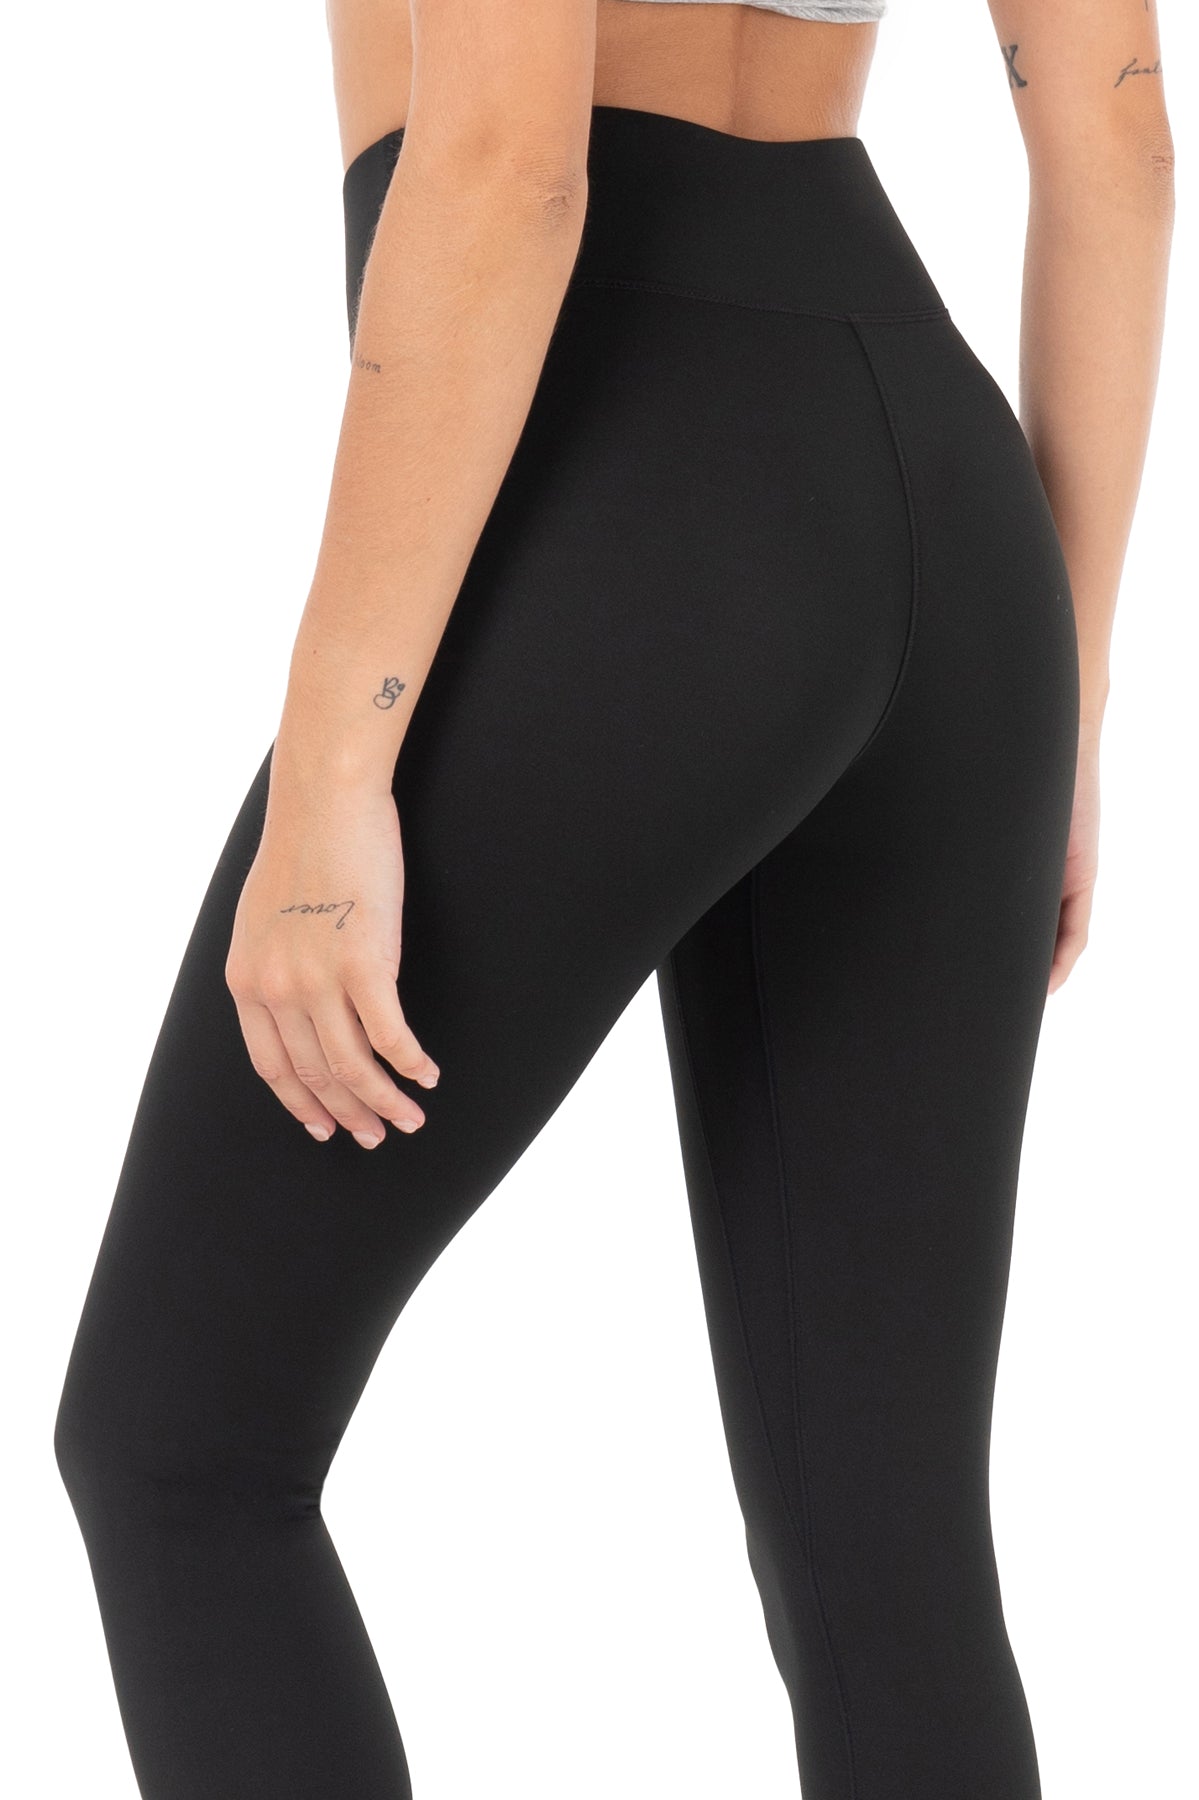 128 Spandex High Quality New Women Yoga Pants Solid Black Sports Gym Wear  Leggings Elastic Fitness Lady Overall Tights Trousers4018706 From Ovgq,  $20.05